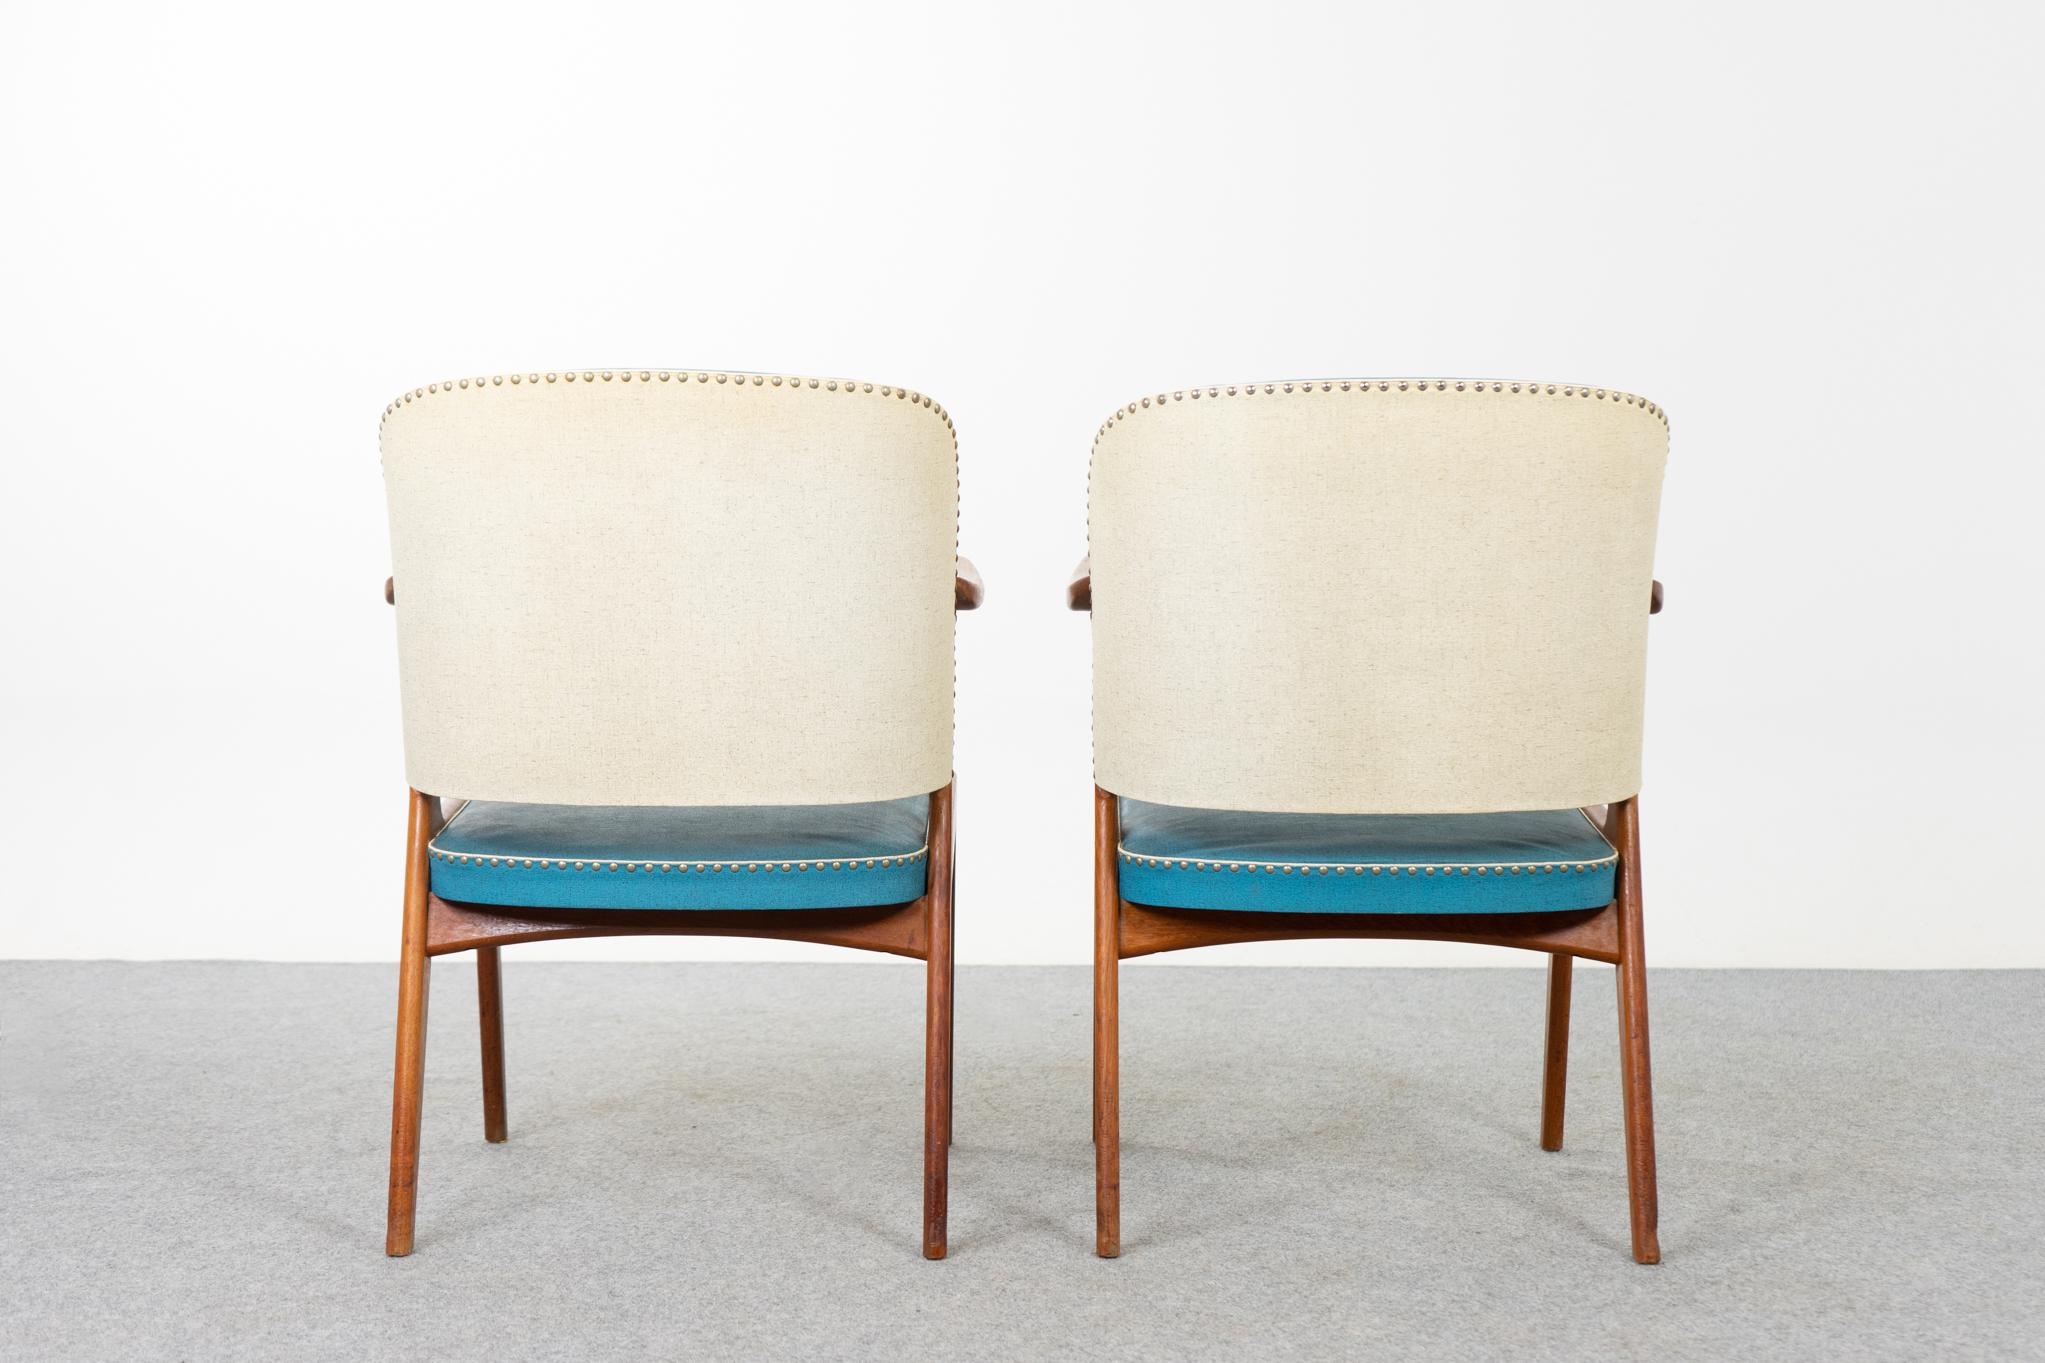 Pair of Danish Mid-Century Modern Teak & Vinyl Arm Chairs In Good Condition For Sale In VANCOUVER, CA